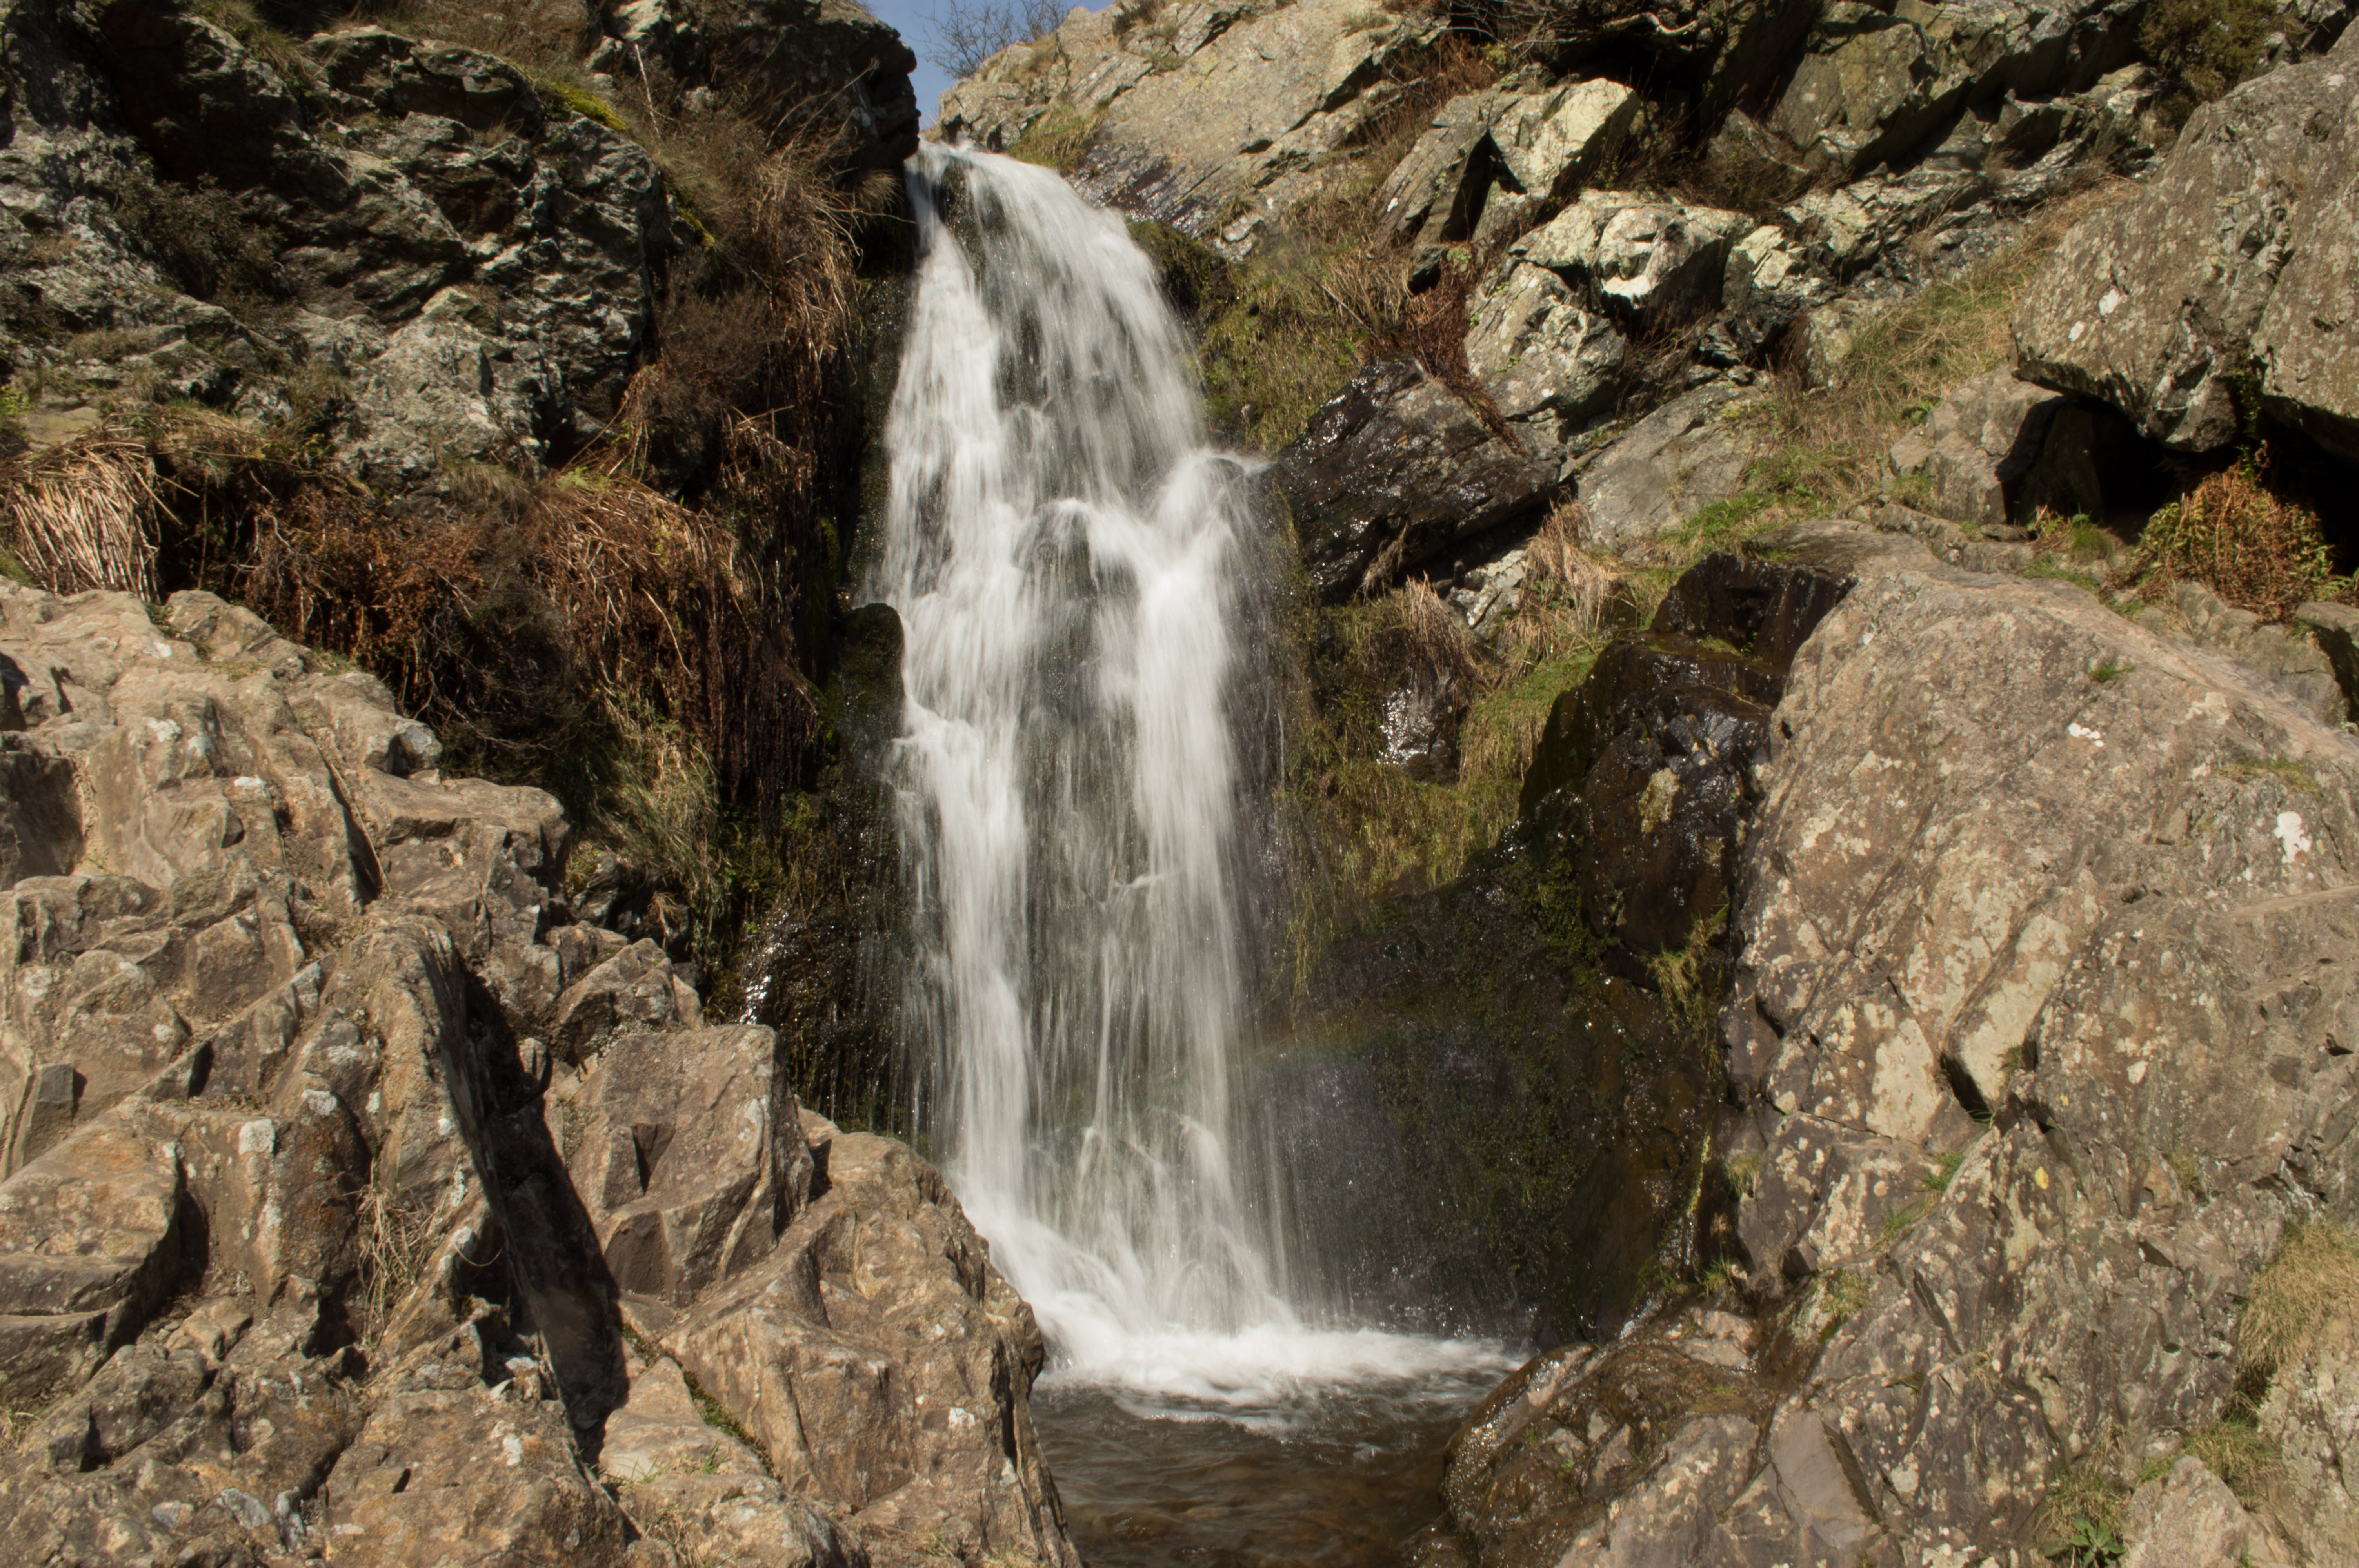 cardingmill valley waterfall (17 of 218)